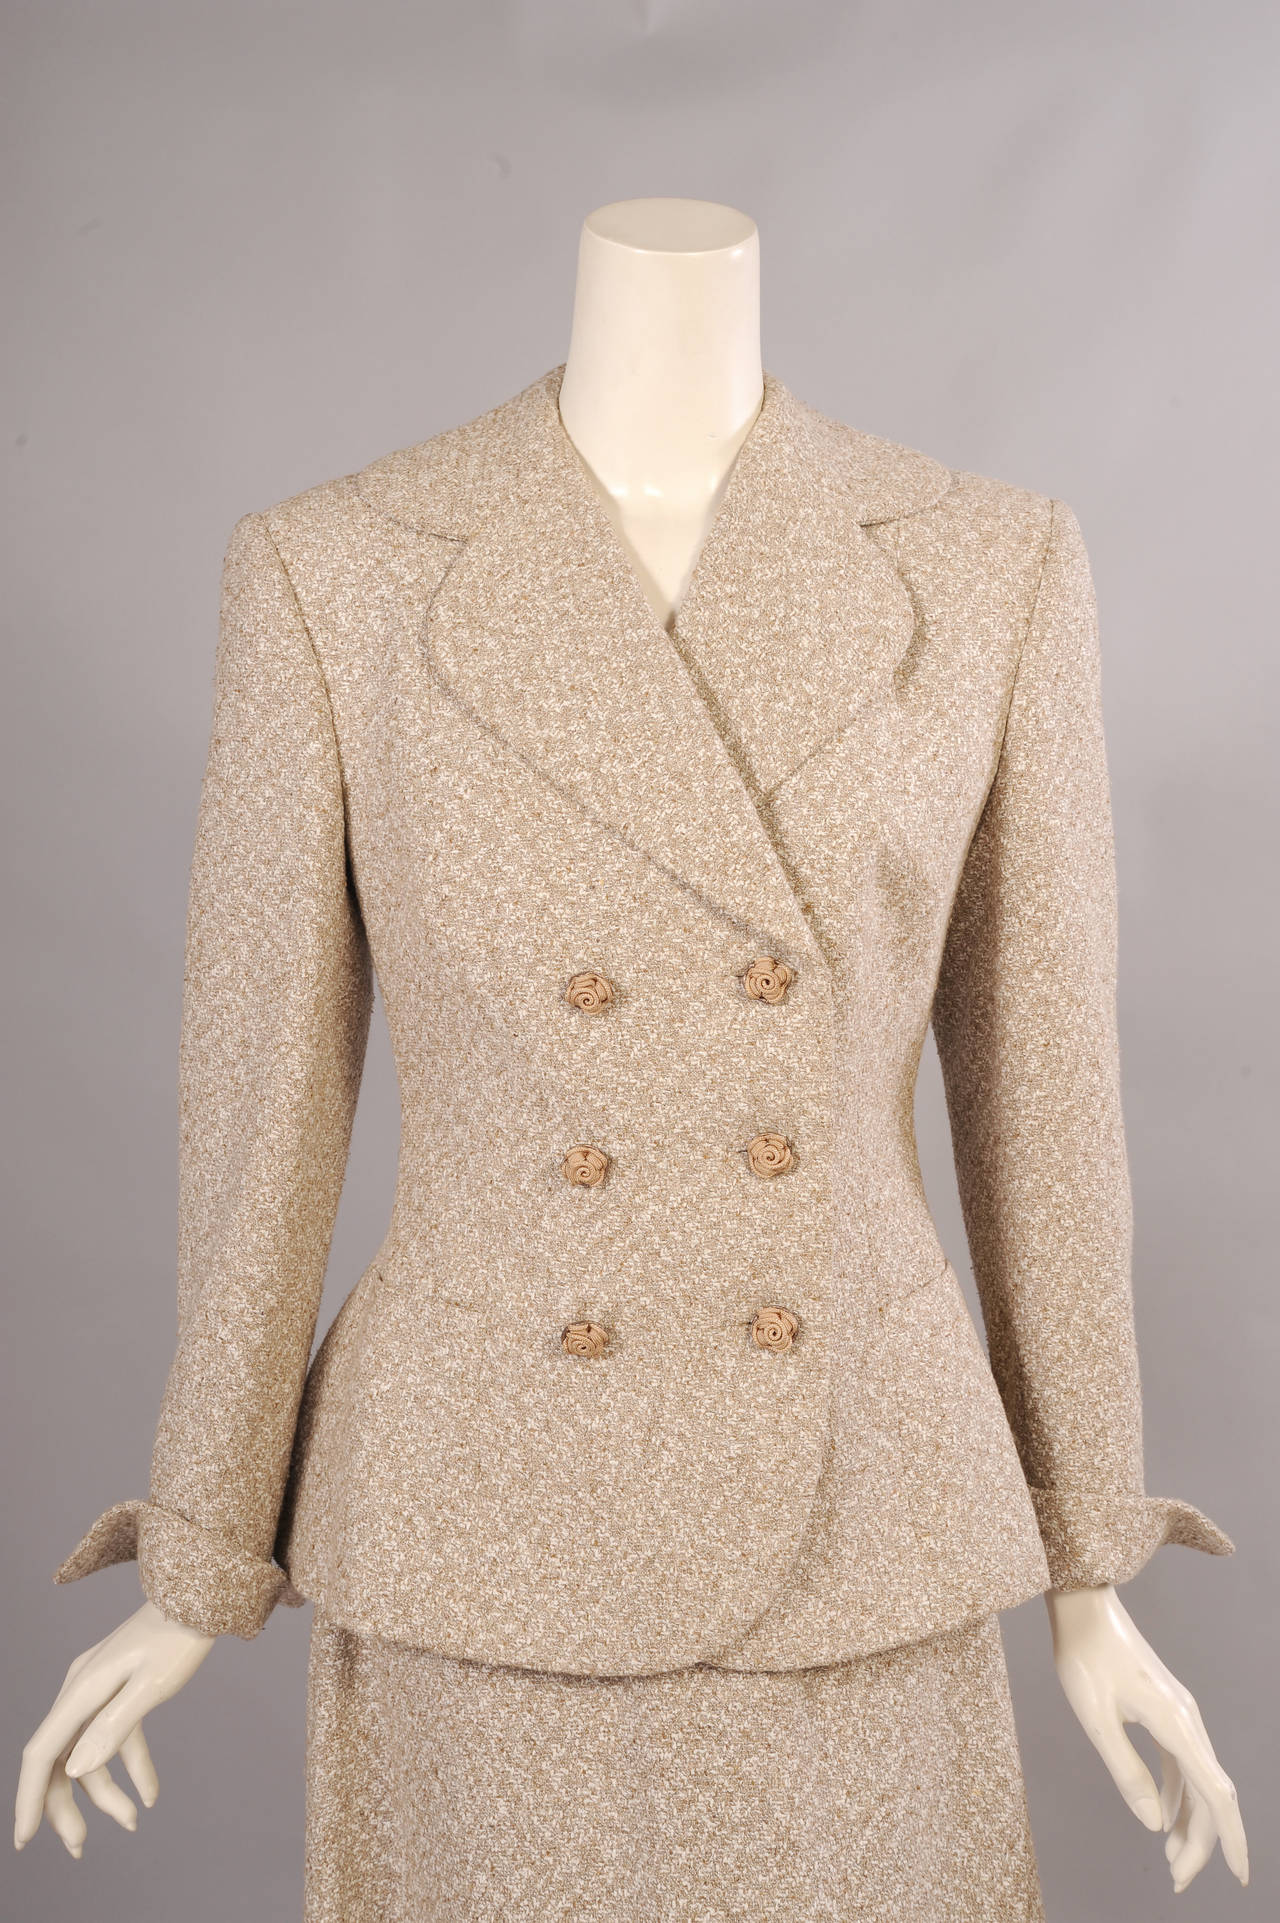 M M Tailleurs, Paris Couture Quality Tweed Evening Suit For Sale at 1stdibs